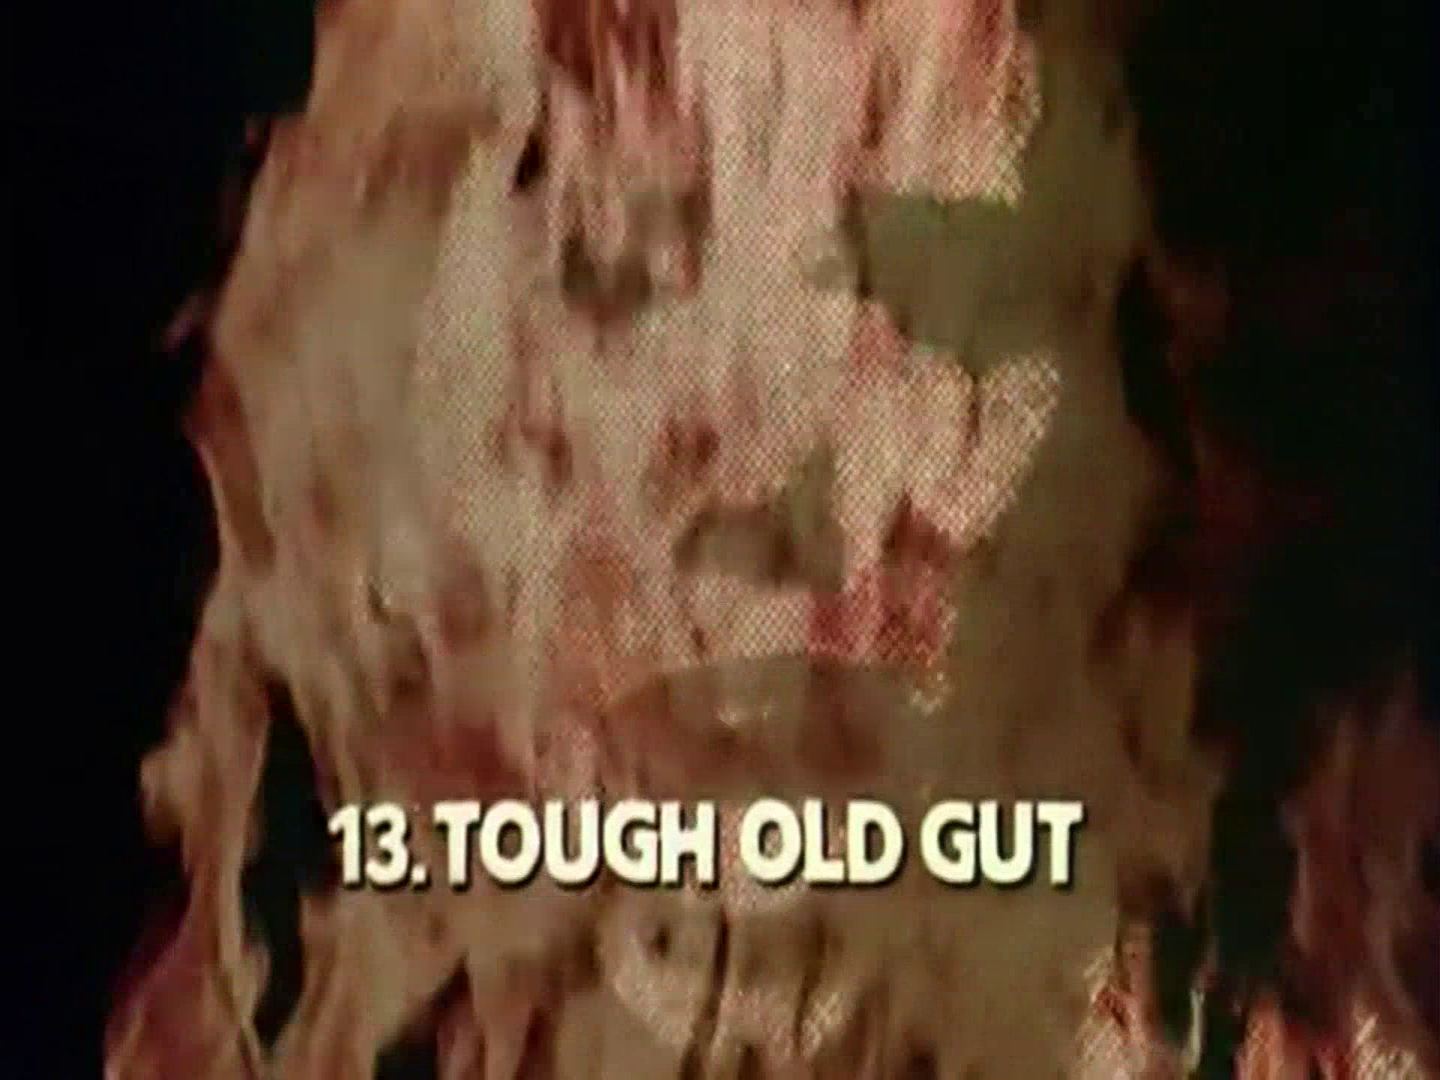 Main title from the 1974 ‘Tough Old Gut’ episode of The World at War (1973-74) (1)